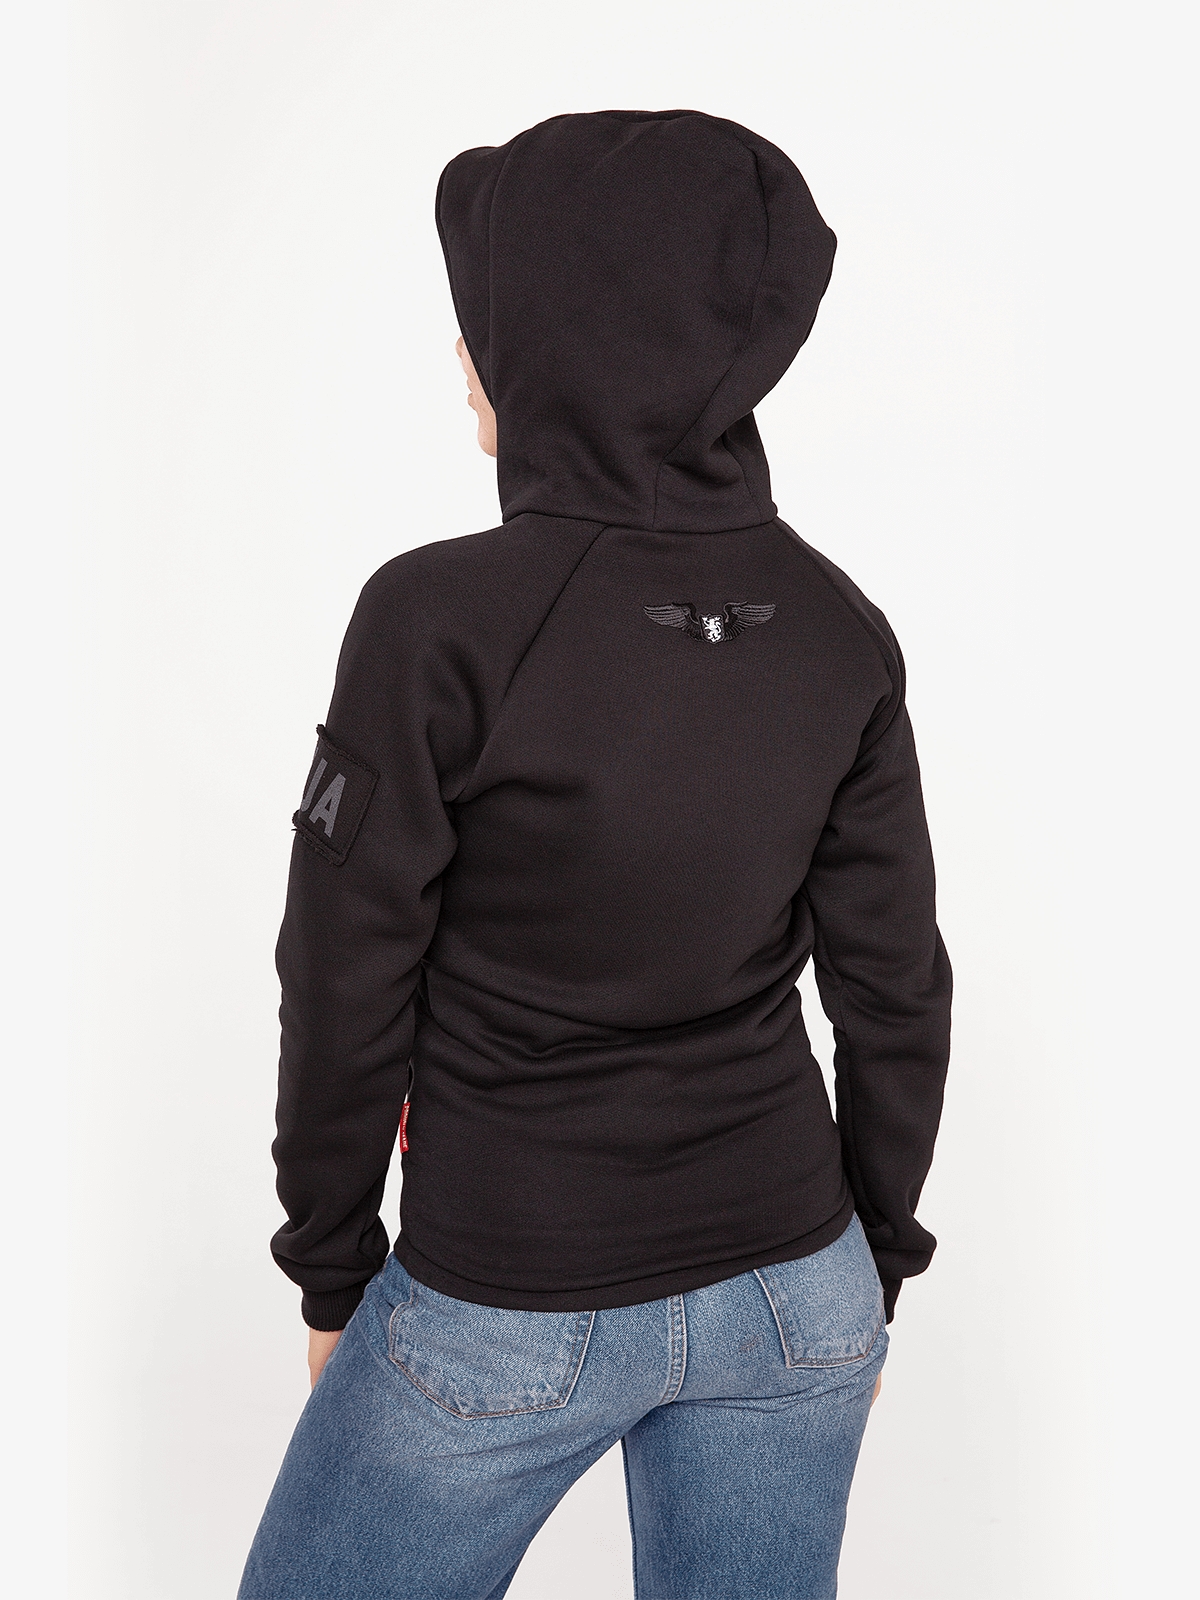 Women's Hoodie Roundel. Color black. 
Technique of prints applied: silkscreen printing, embroidery.